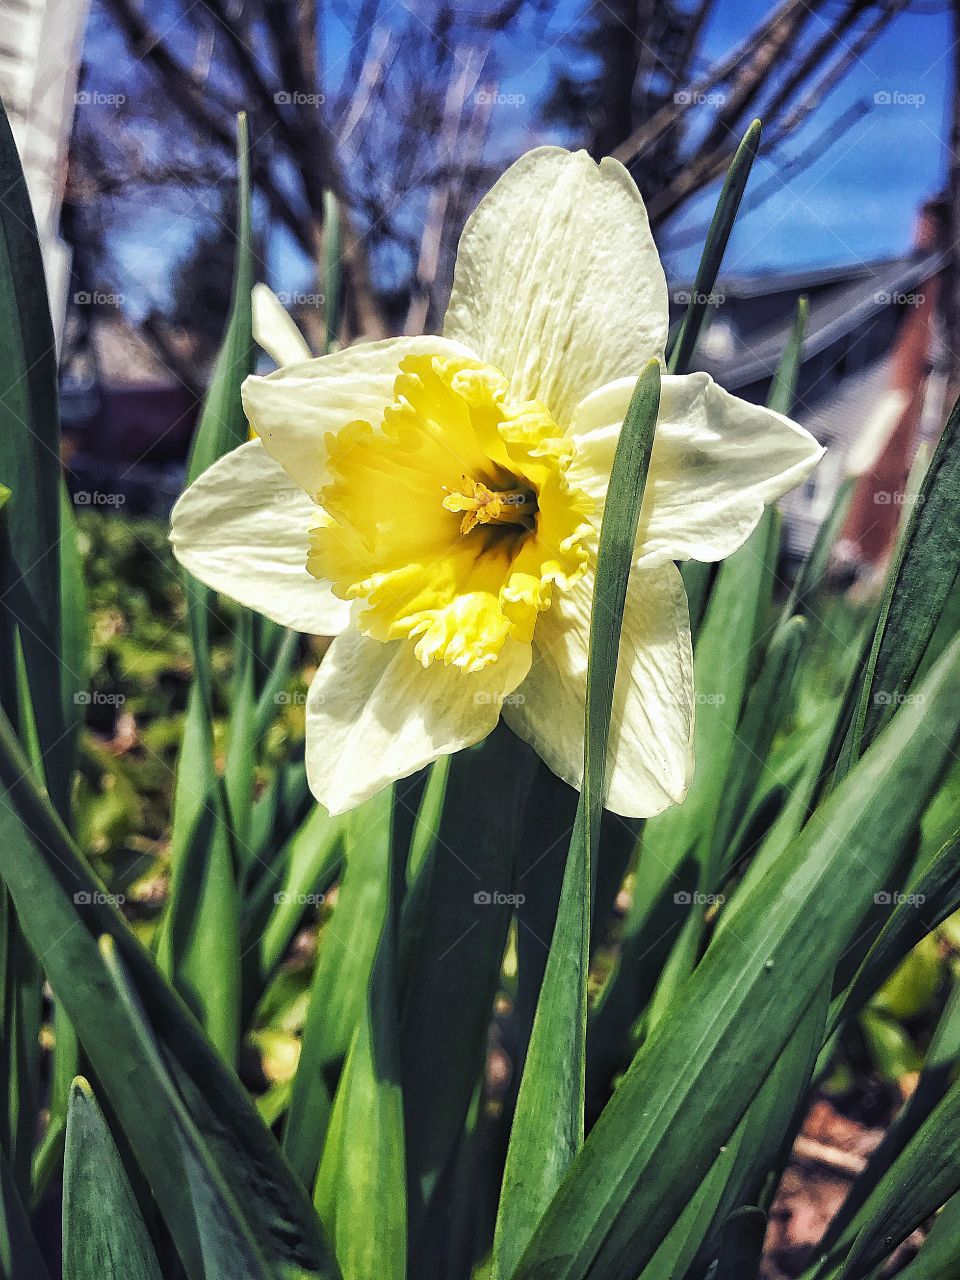 Spring is finally here...